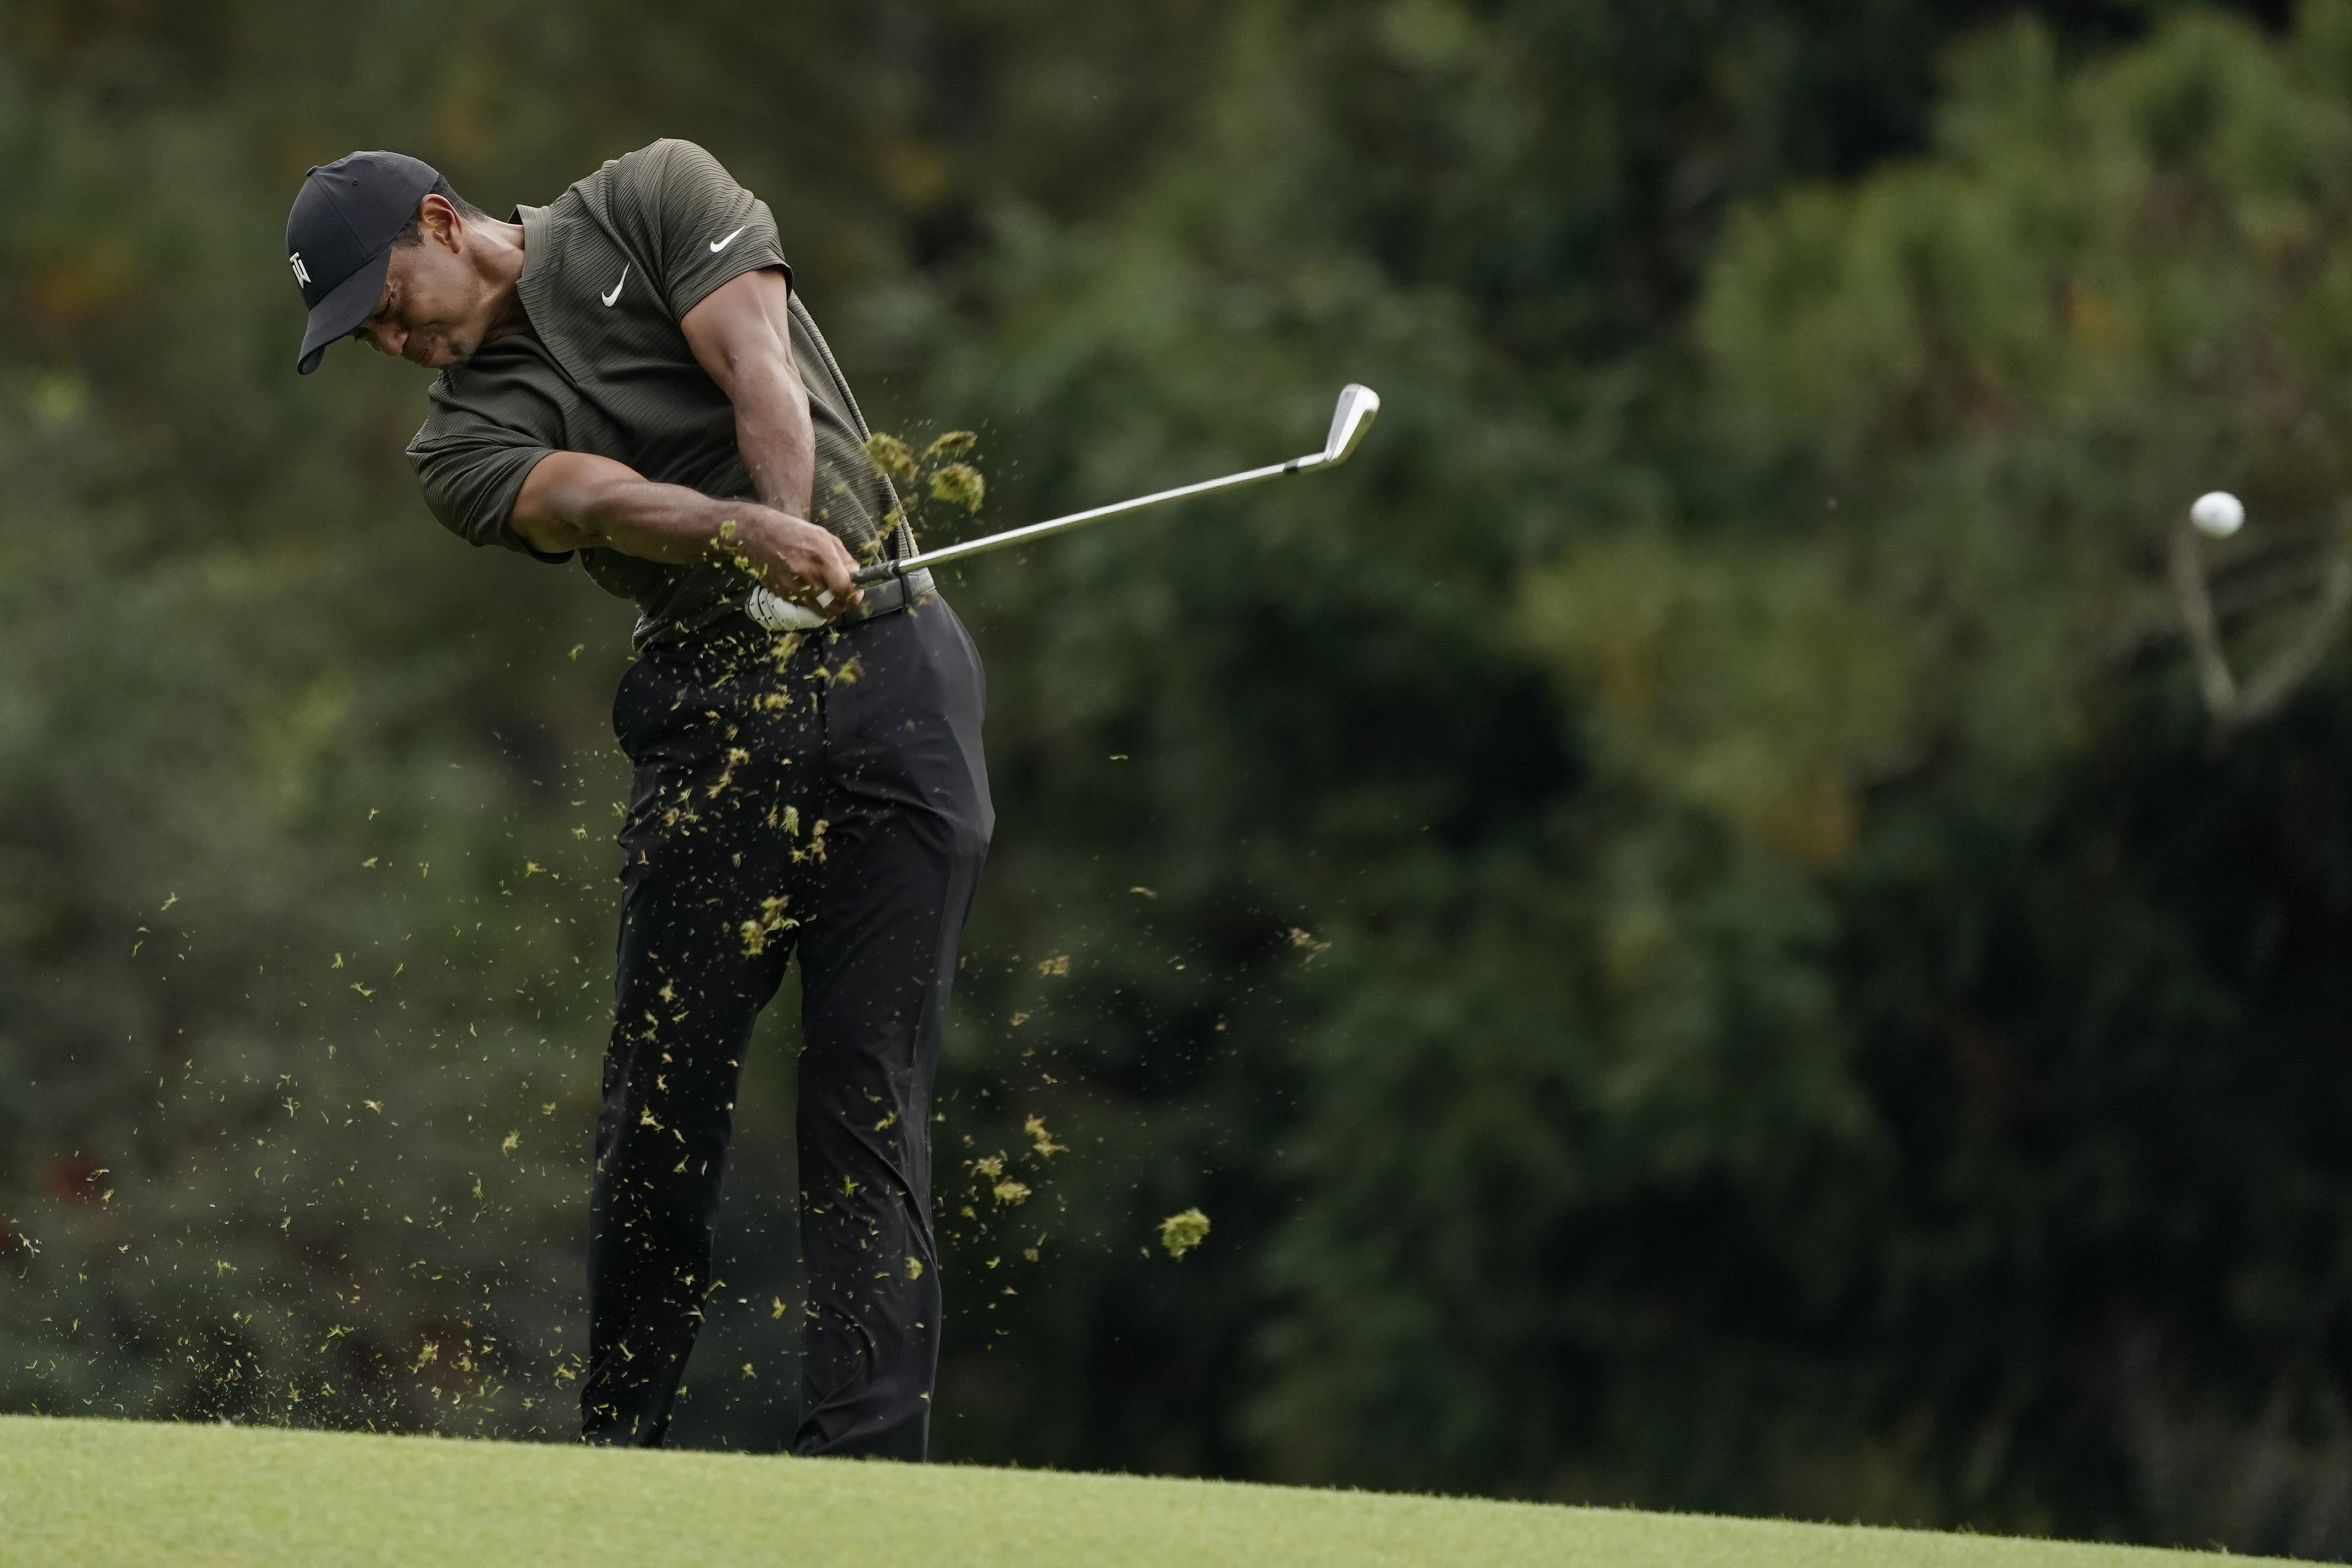 The Masters 2020 2nd round FREE LIVE STREAM (11/13/20) Watch Tiger Woods, Bryson DeChambeau at Augusta National online Time, TV, channel